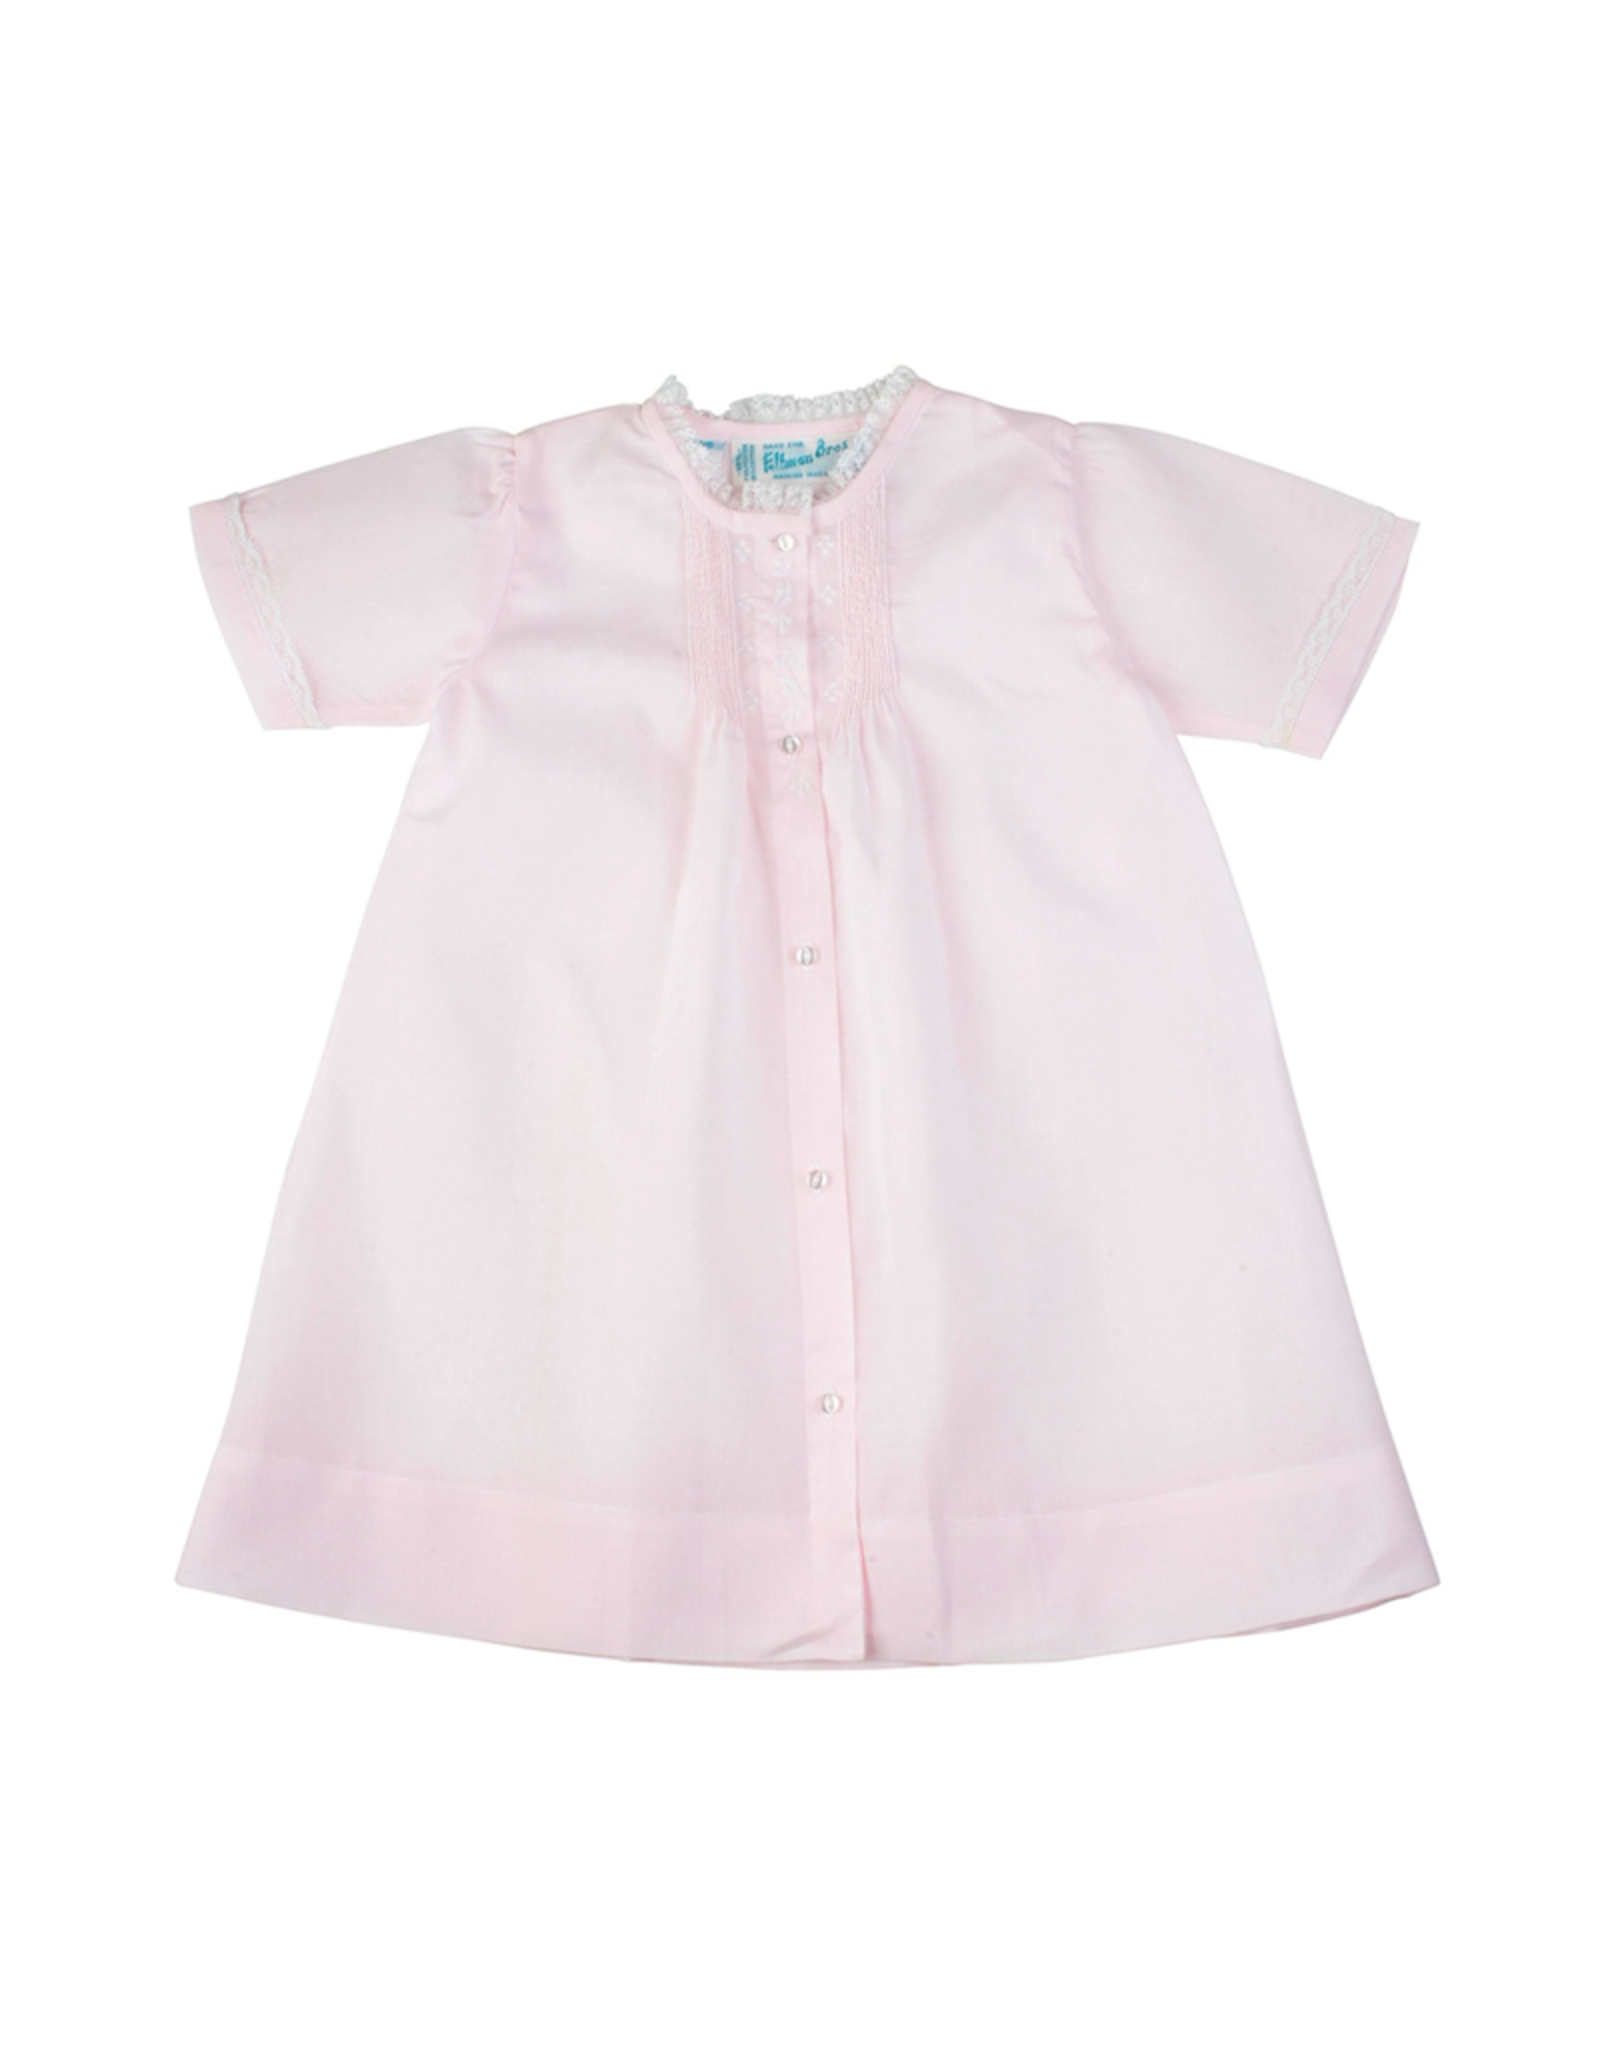 Feltman Brothers 74173 Daygown pink